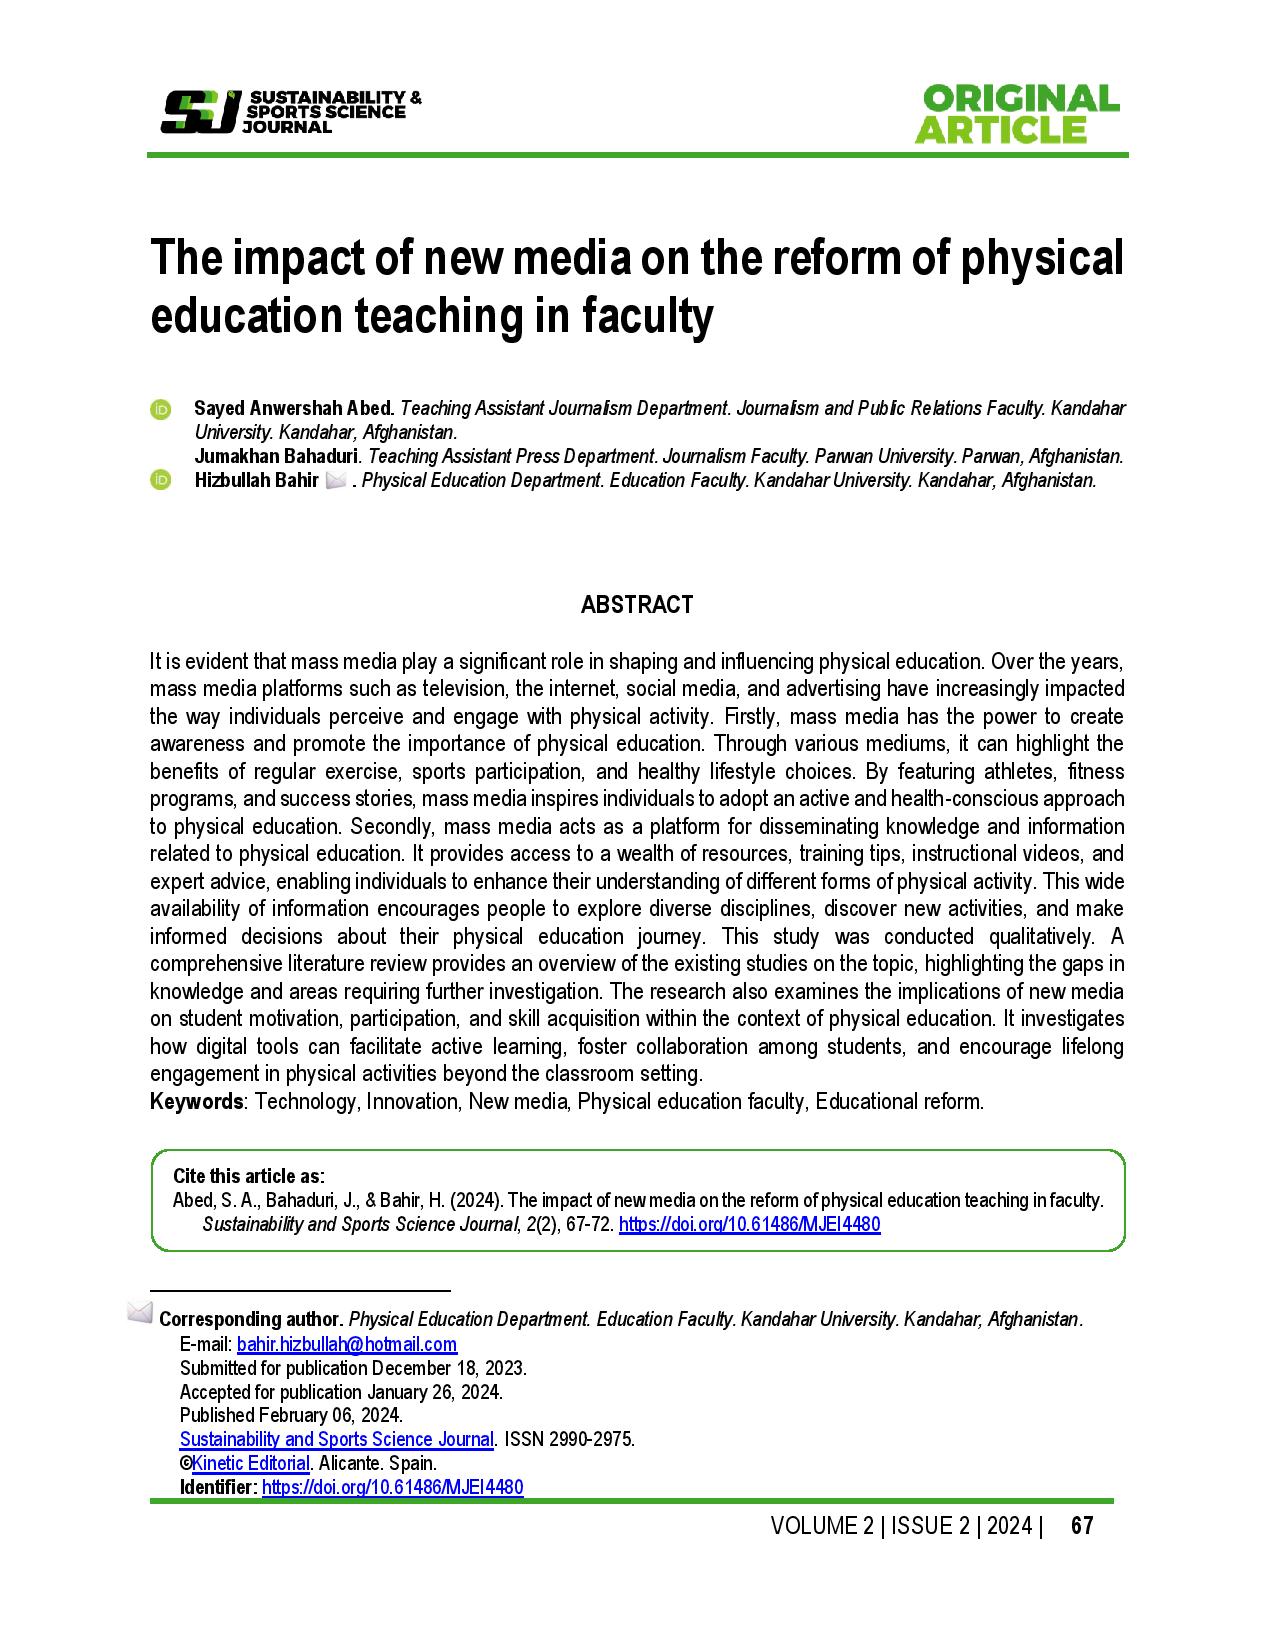 The impact of new media on the reform of physical education teaching in faculty